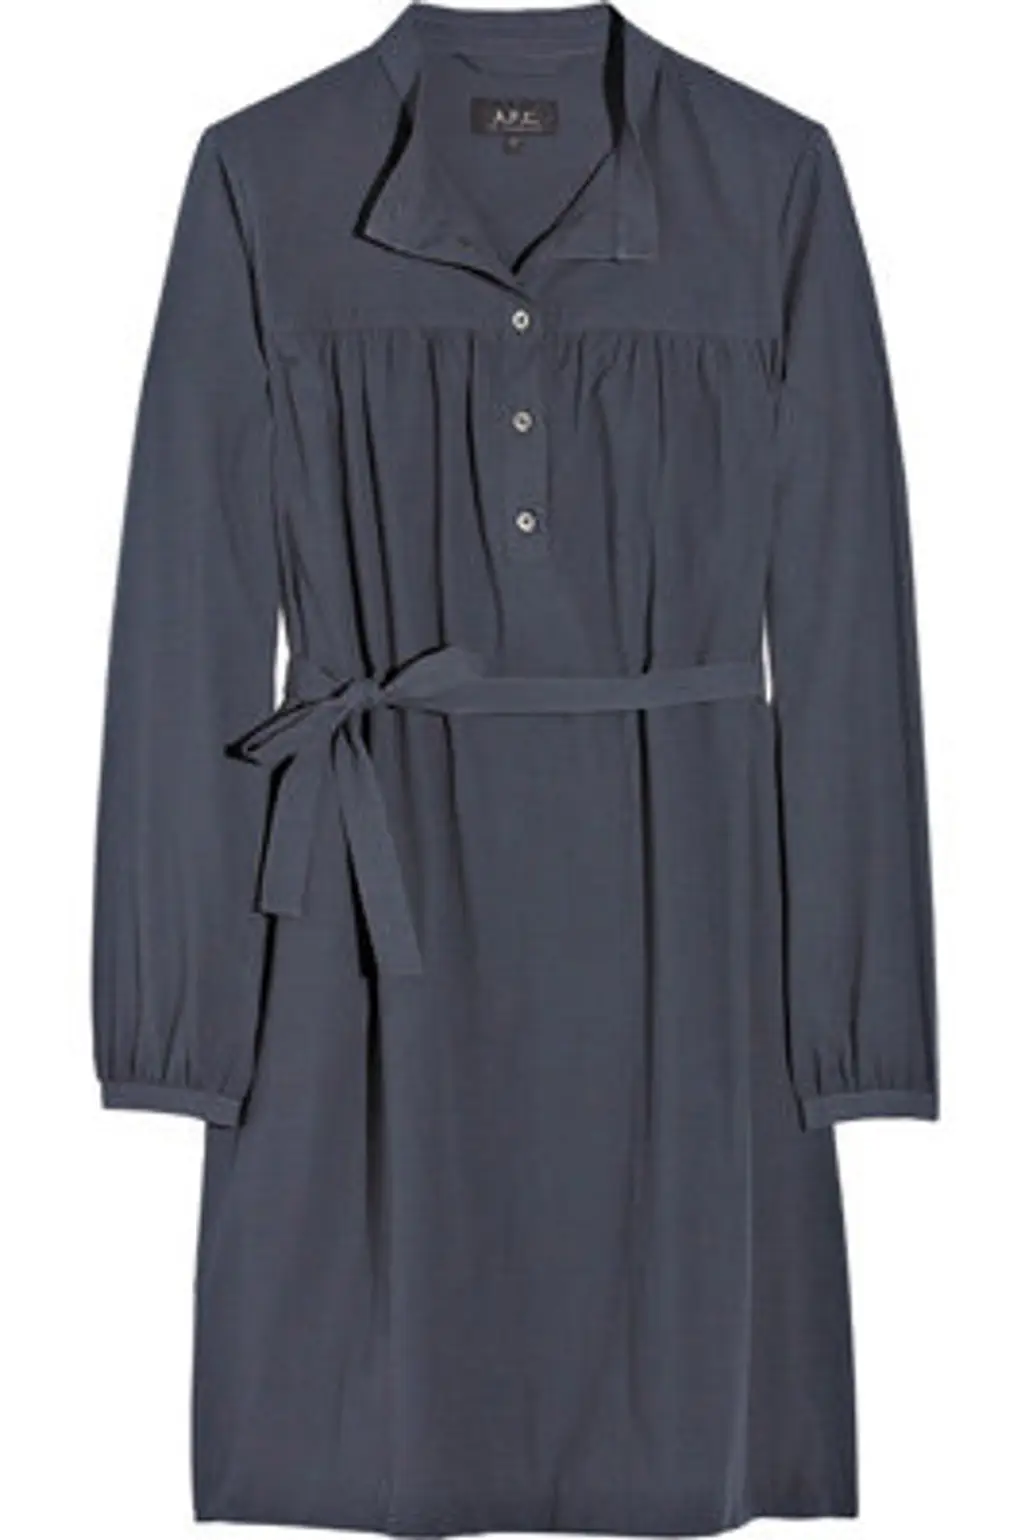 A. P. C. Belted Cotton Smock Dress